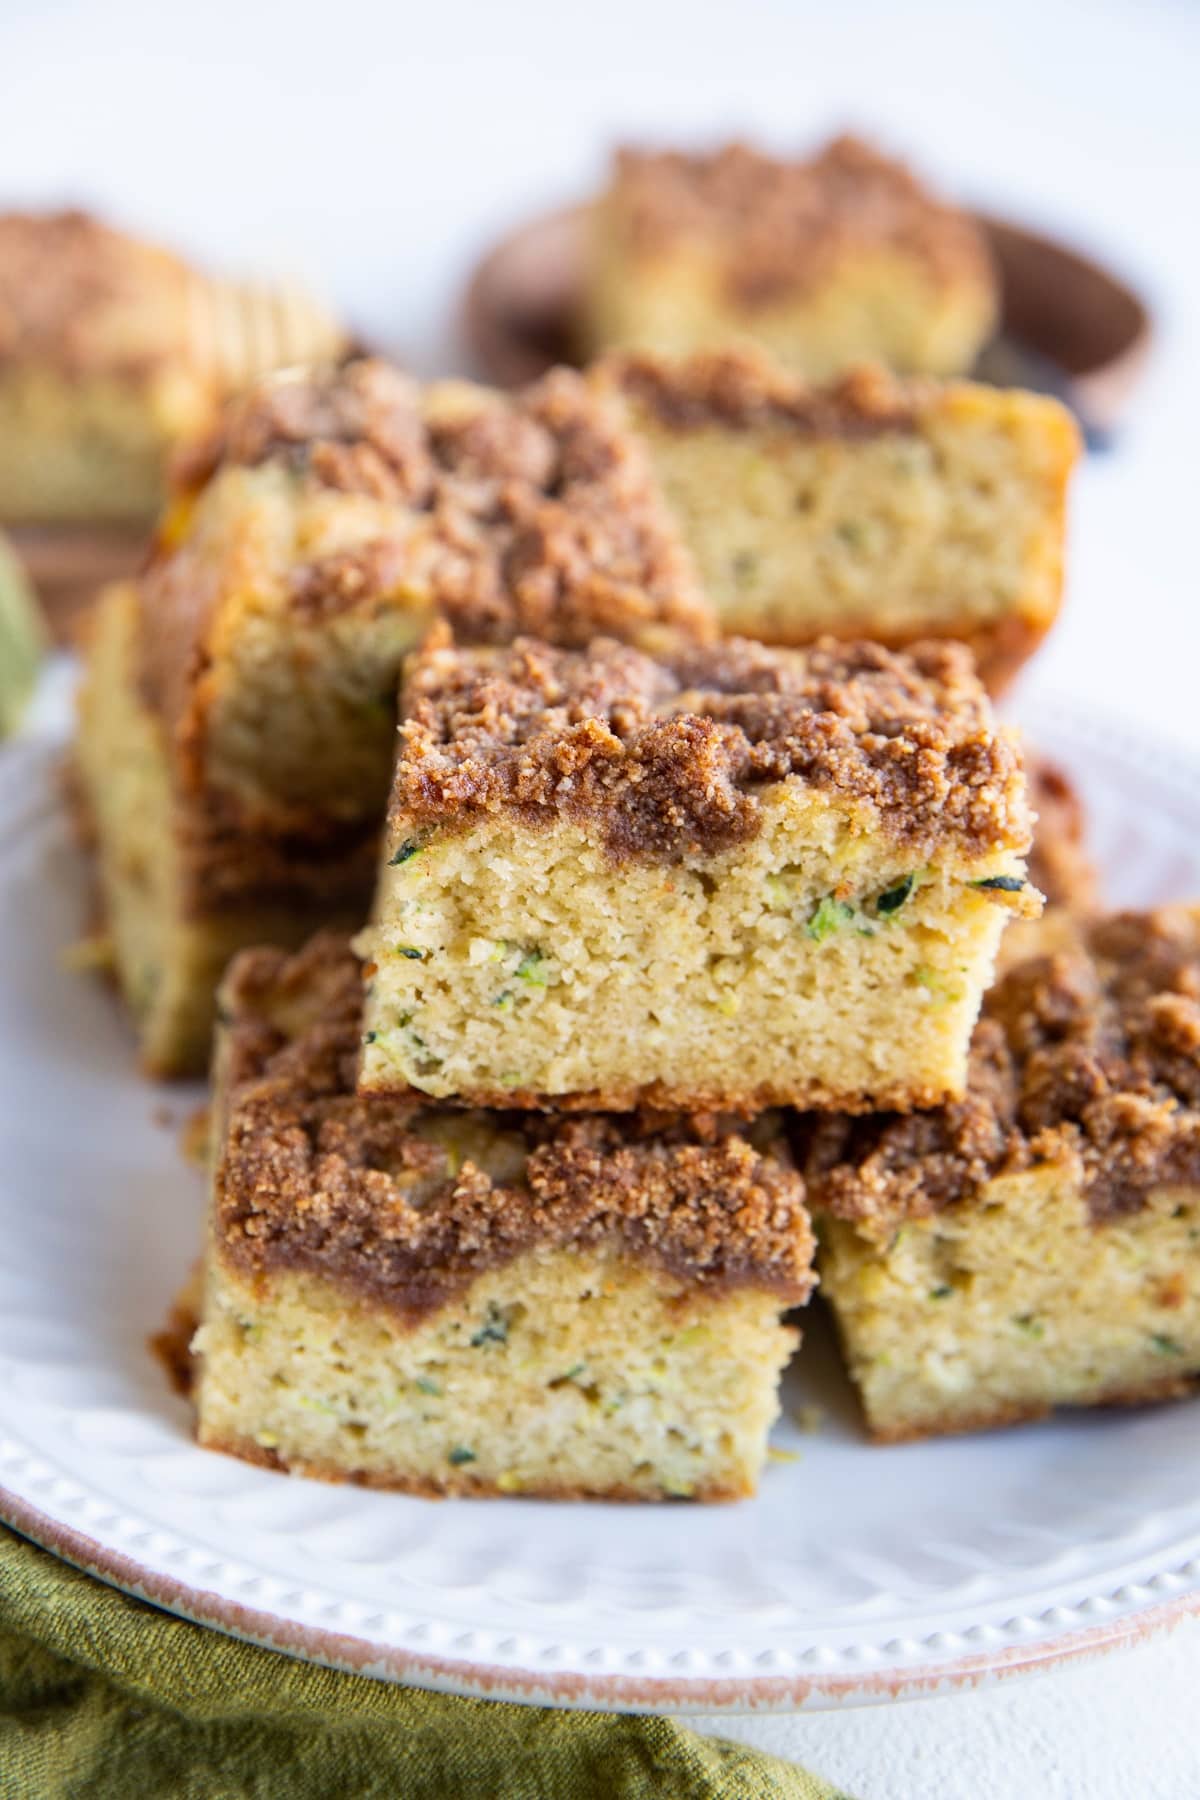 Stack of slices of zucchini cake on a white plate, ready to serve.